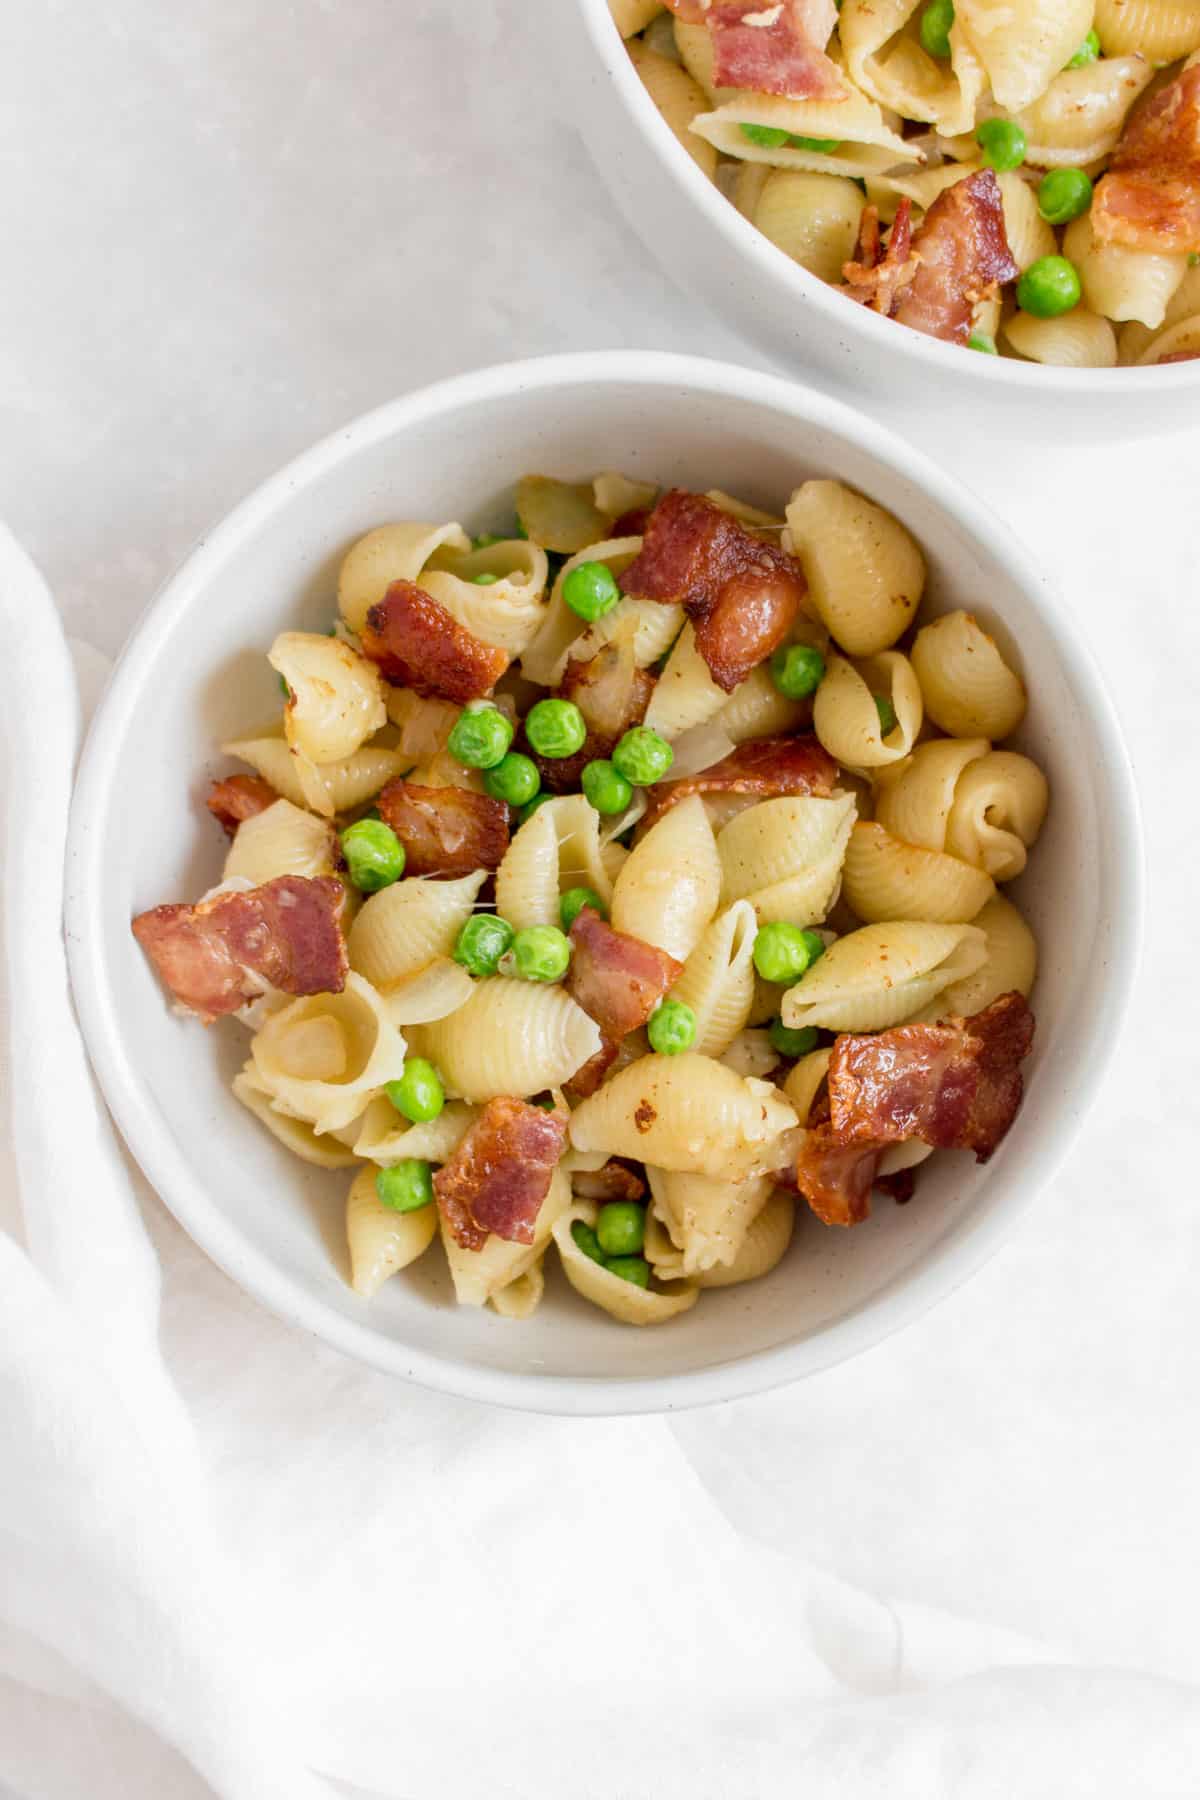 Overhead view of a bowl of pasta with peas and bacon.